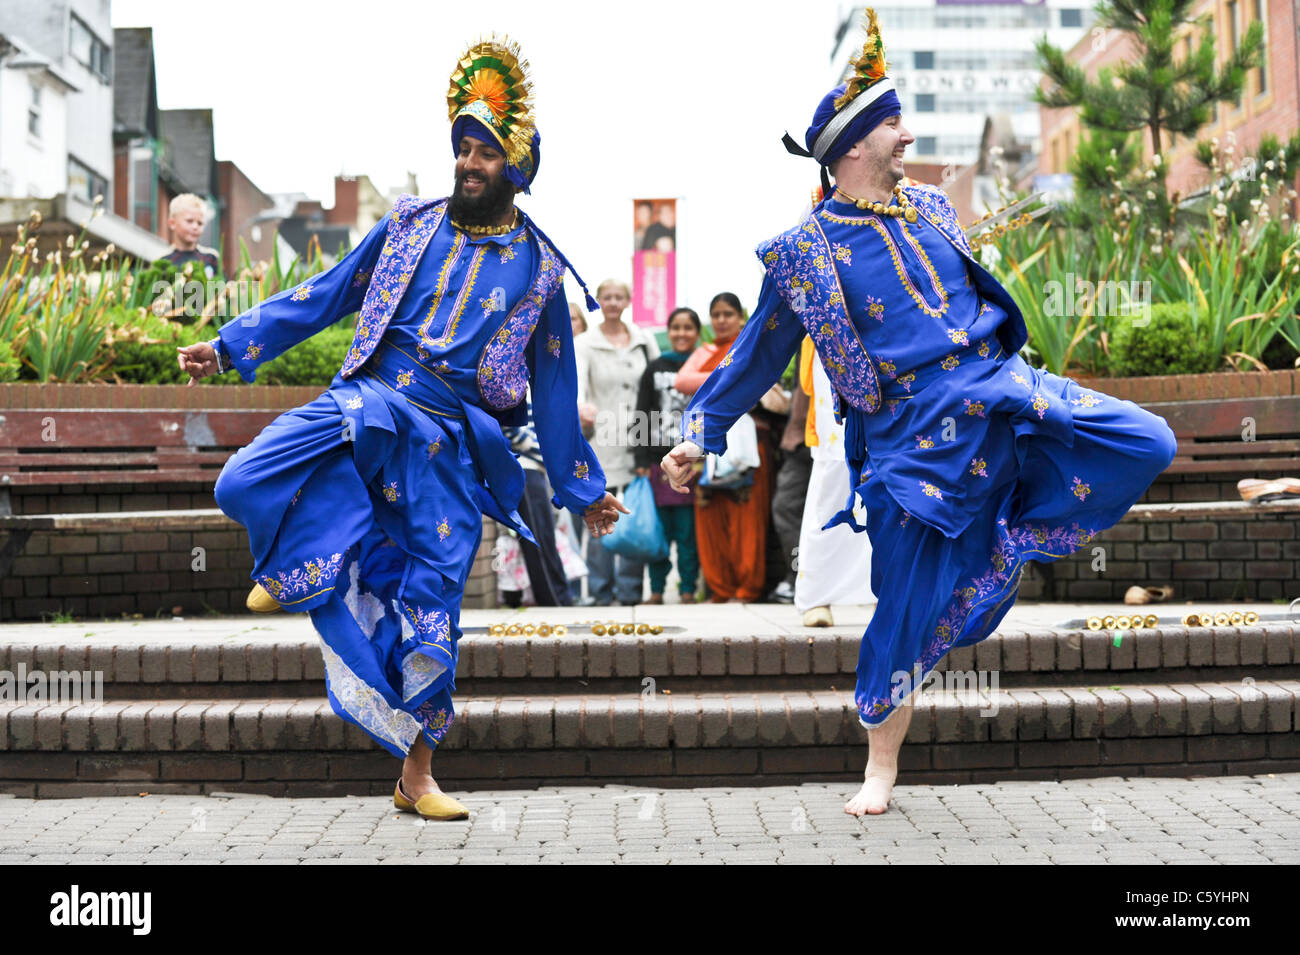 Two Bhangra dancers in traditional colourful and decorative Indian costume in West Bromwich High Street watched by a crowd Stock Photo